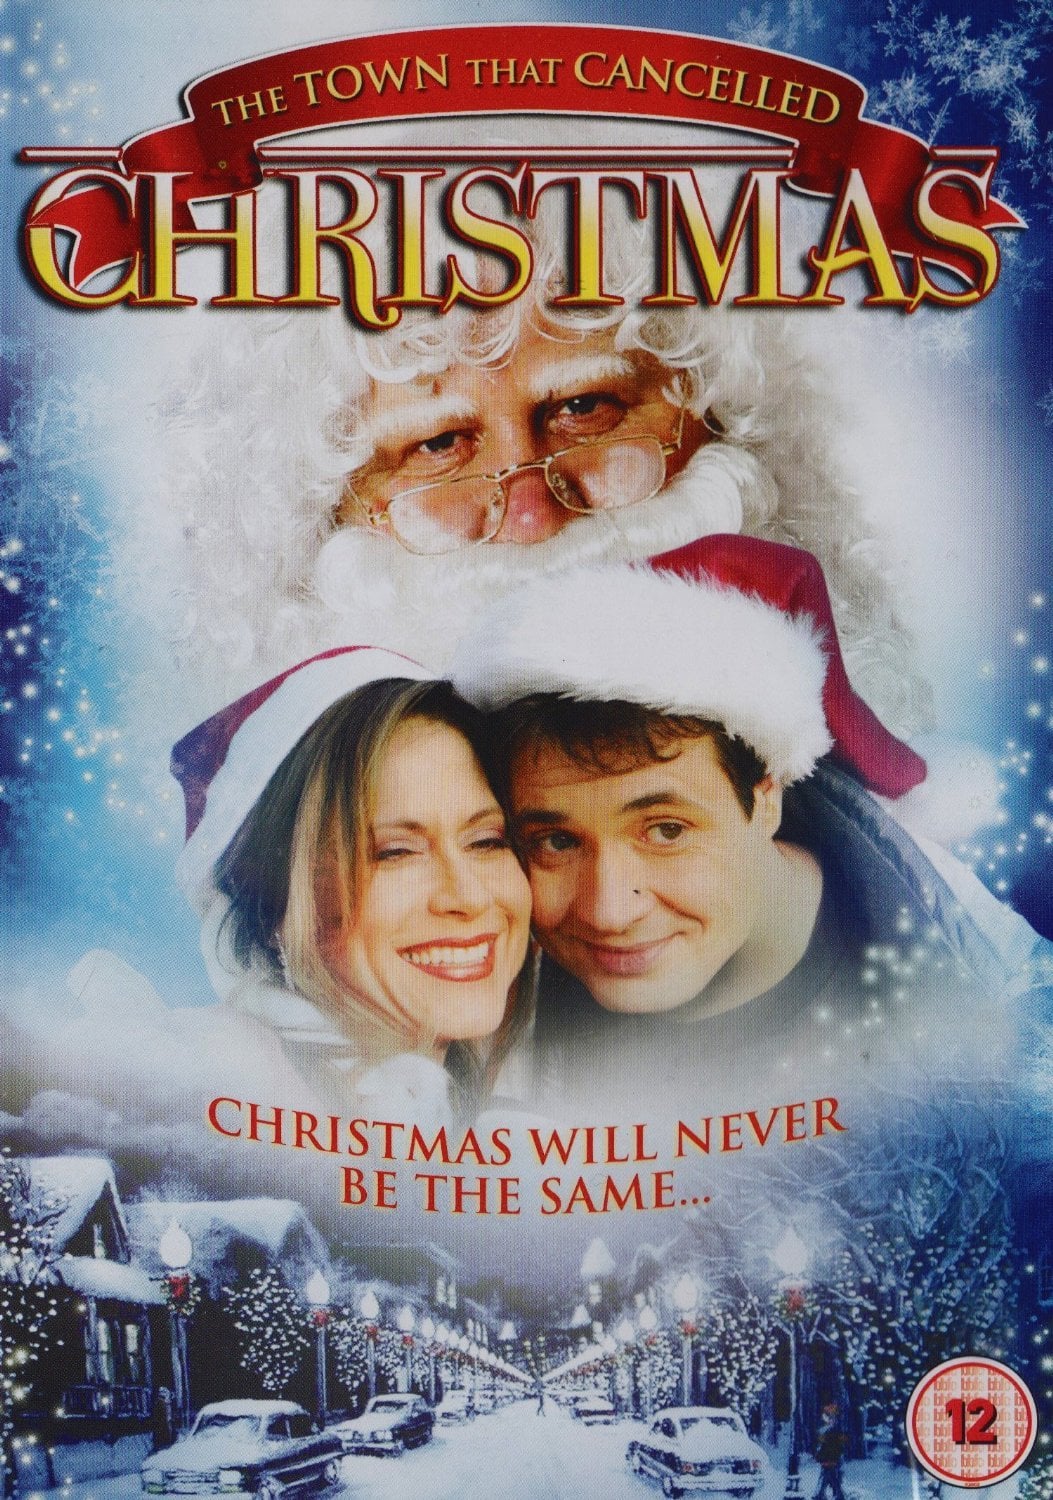 Poster for the movie "The Town That Banned Christmas"